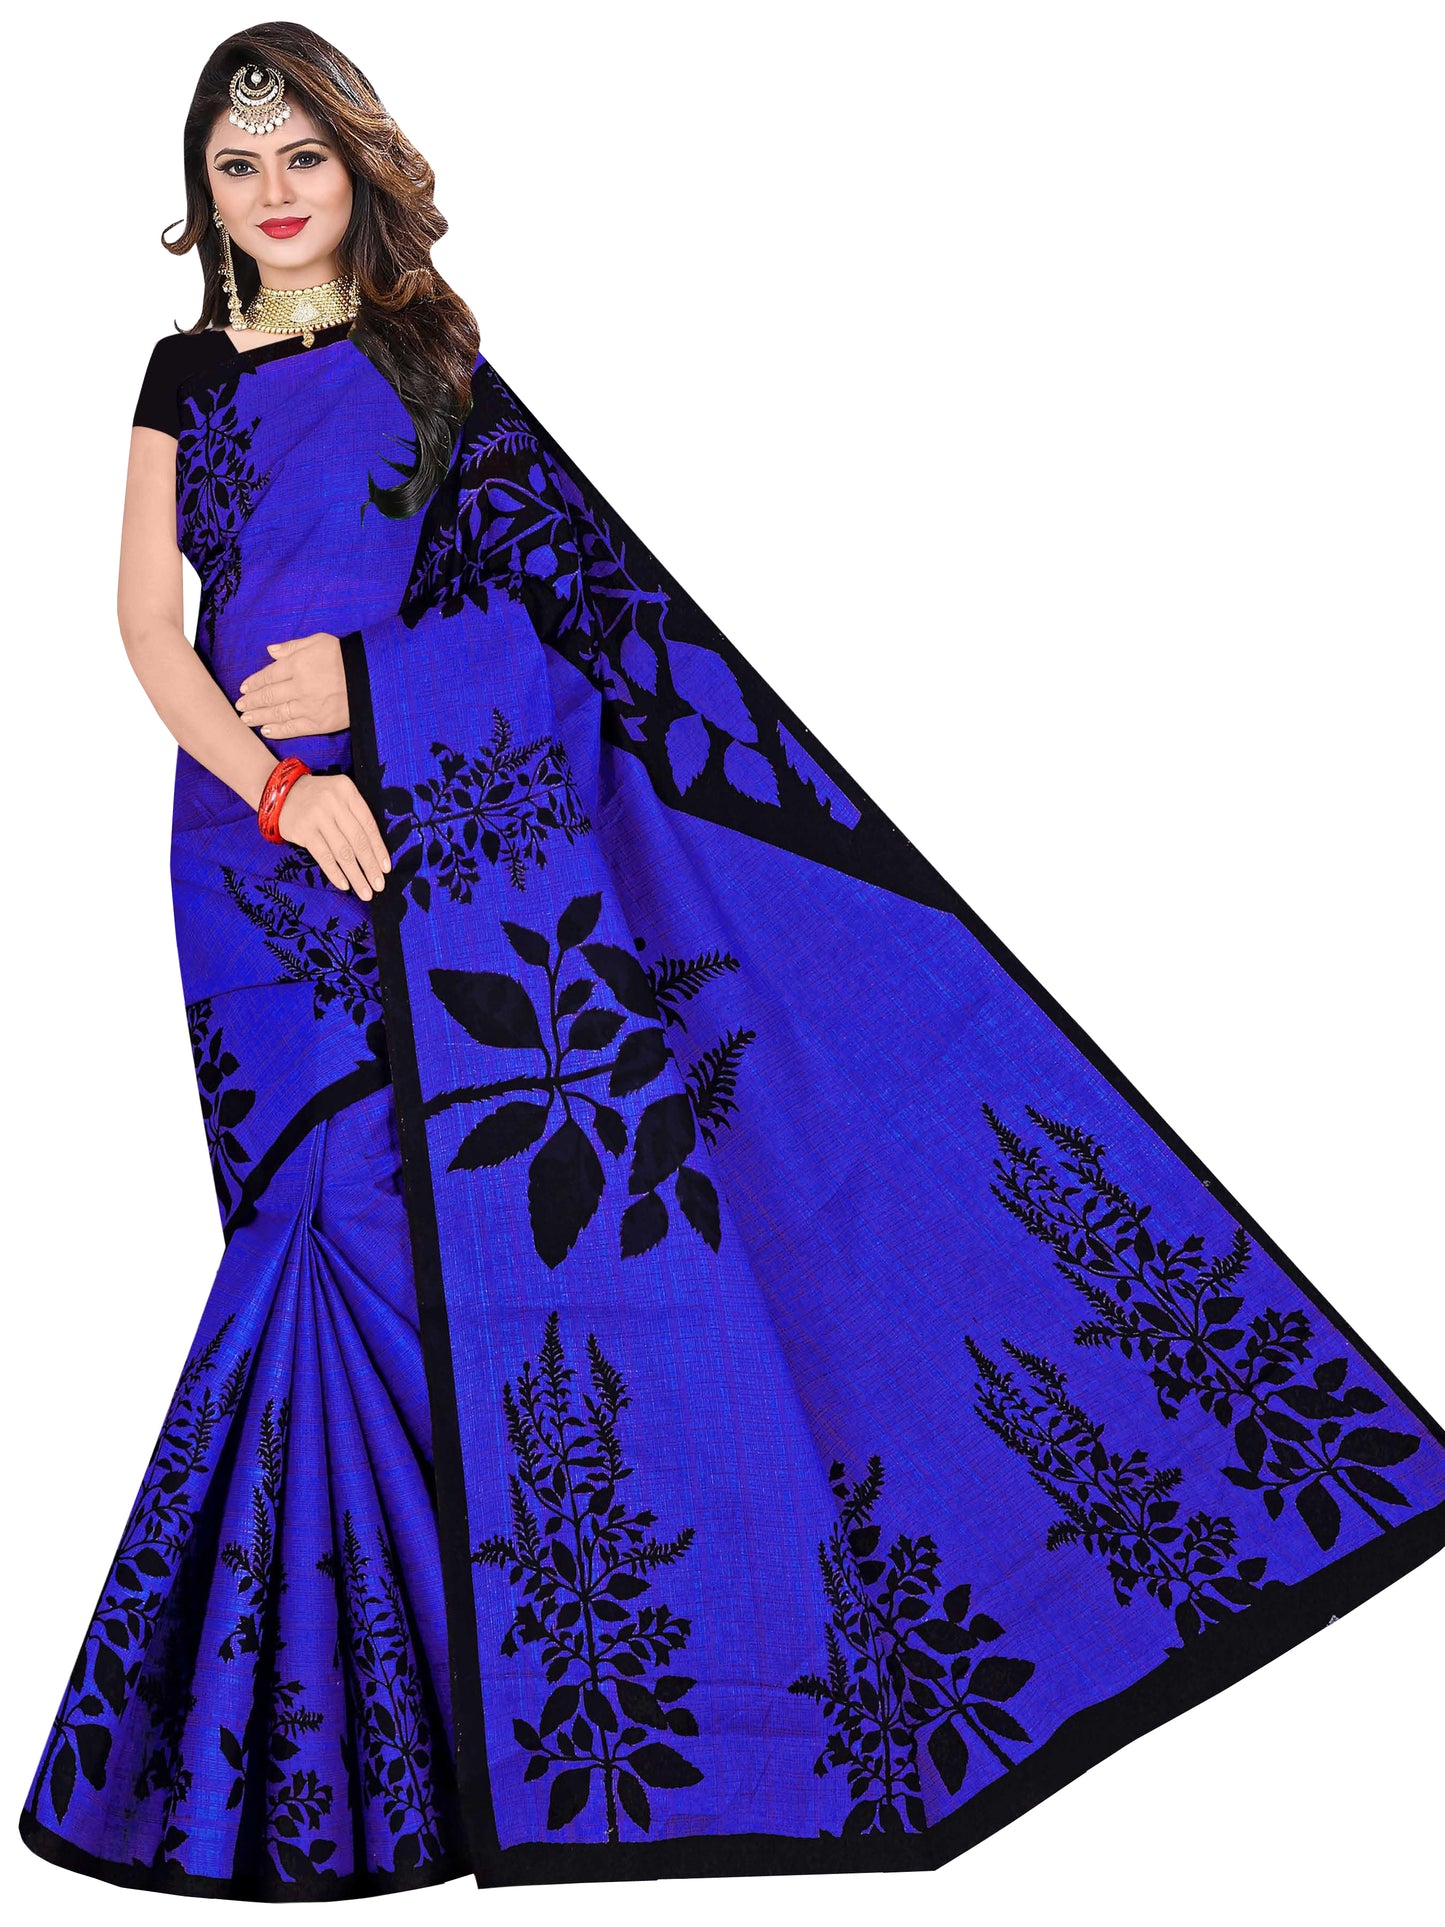 Pure Cotton Saree for Women, Casual Wear (Item Code: XYZCCSKR17)